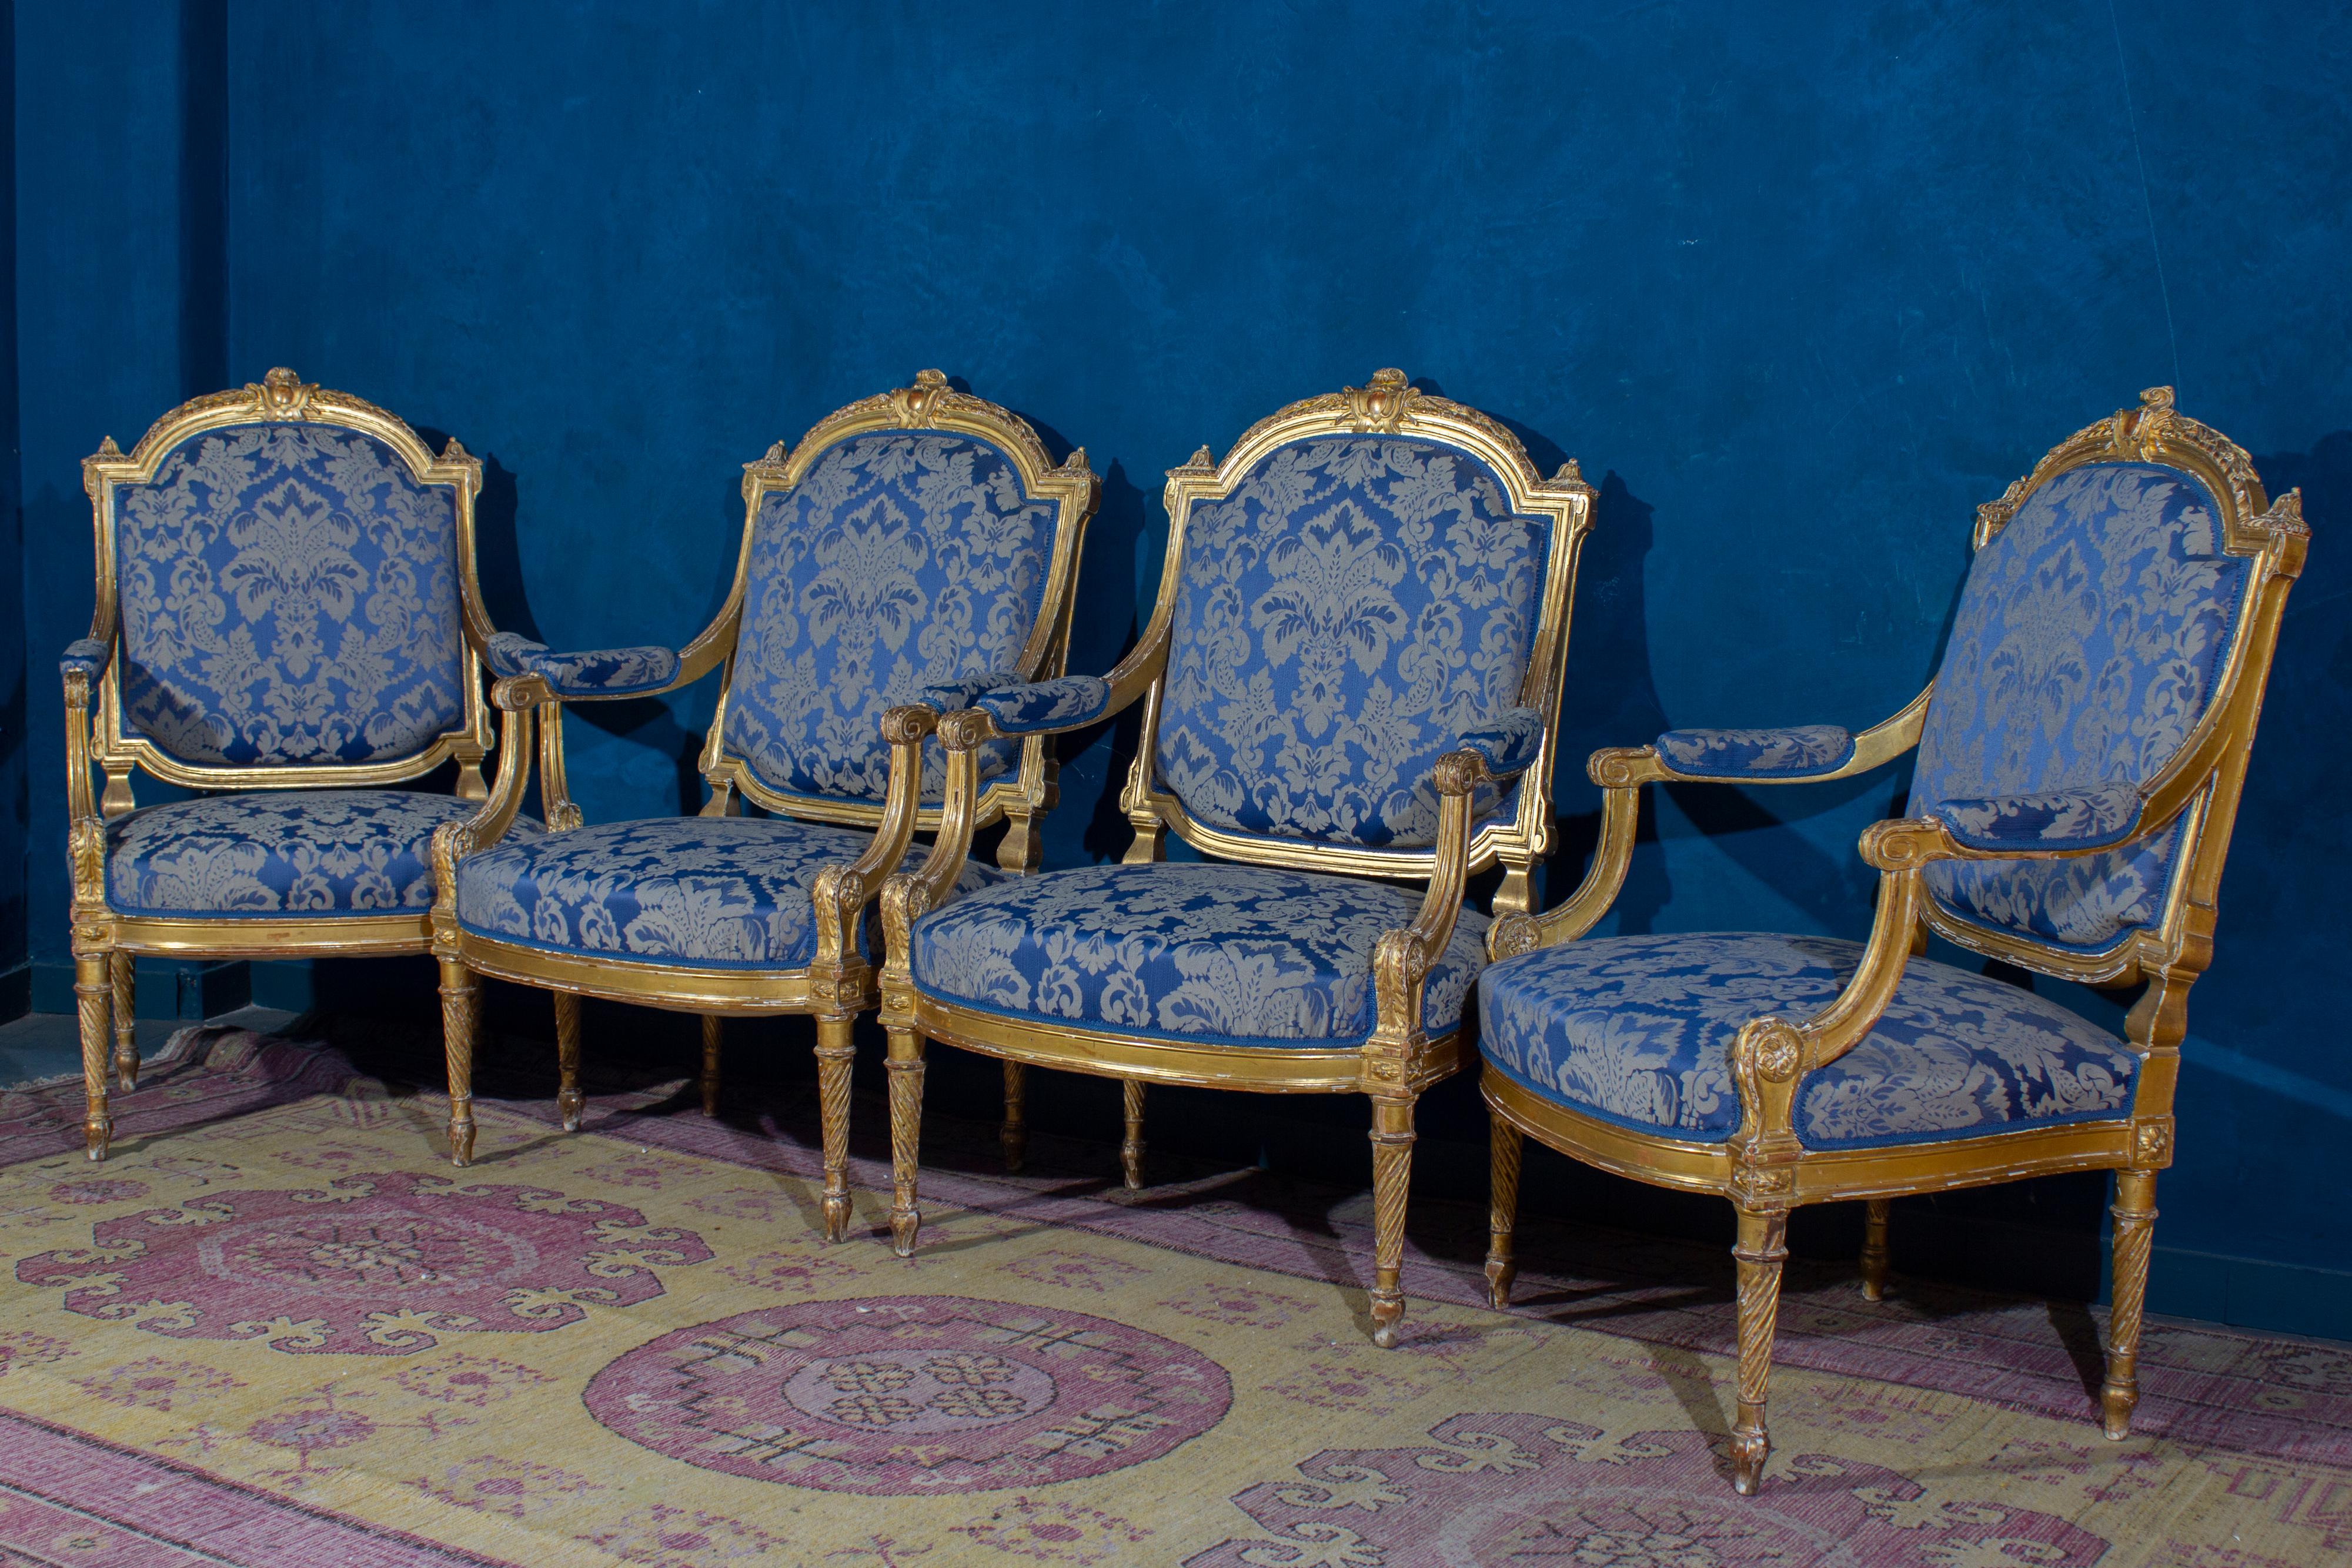 Giltwood Elegant French 19' Century Gilt Living Room Suite with a Sofa and Four Armchairs For Sale